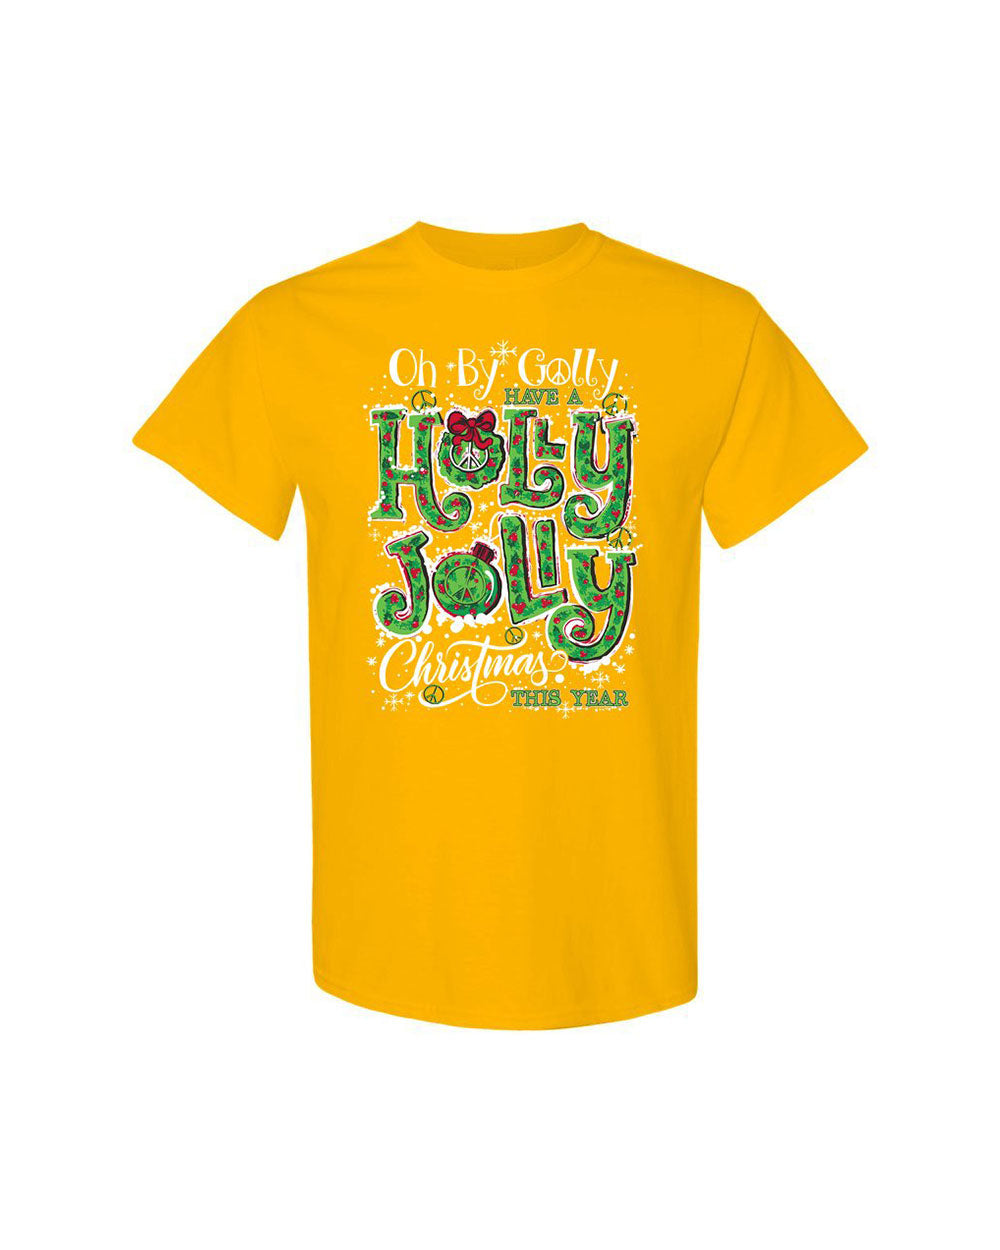 OH BY GOLLY CHRISTMAS COTTON SHIRT - TY2710231